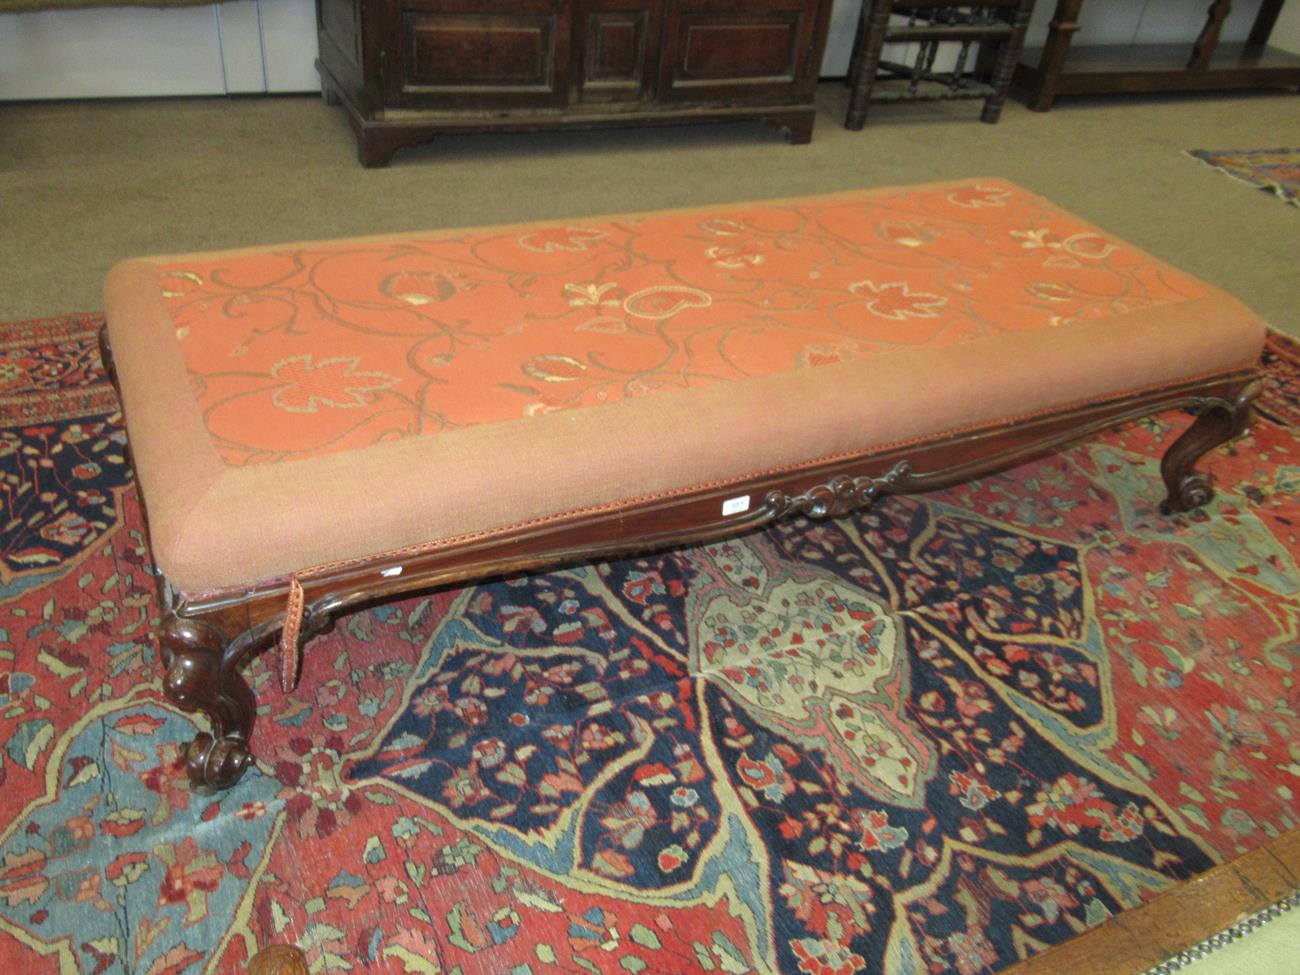 A Victorian Rosewood Frame Oversized Footstool, mid 19th century, recovered in modern crewelwork - Image 3 of 6